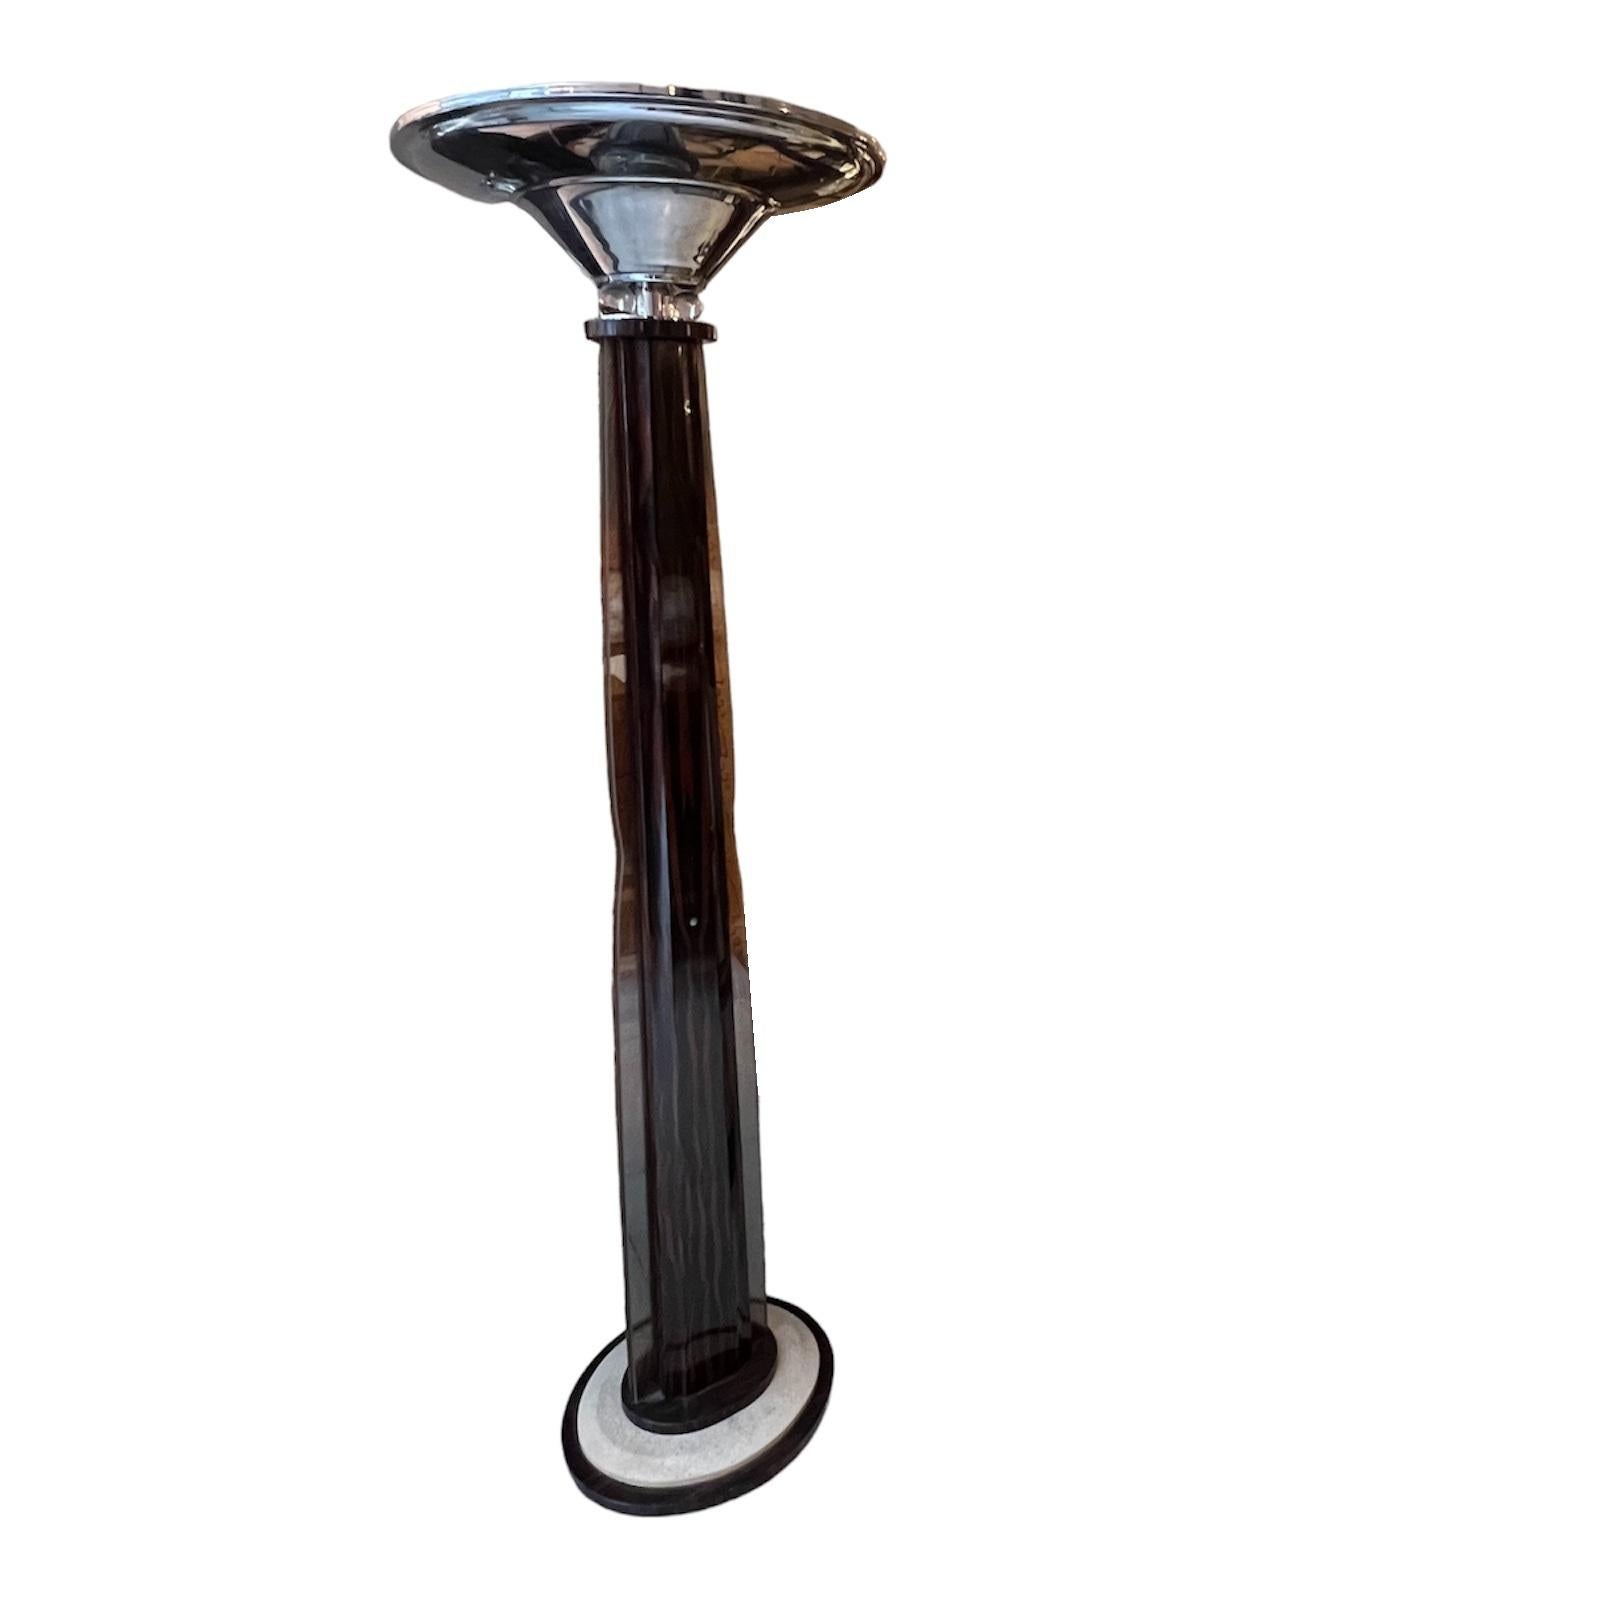 2 floor lamps Art Deco
Materials: wood, glass, chrome
France
1920
You want to live in the golden years, those are the floor lamps that your project needs.
We have specialized in the sale of Art Deco and Art Nouveau styles since 1982.
Pushing the